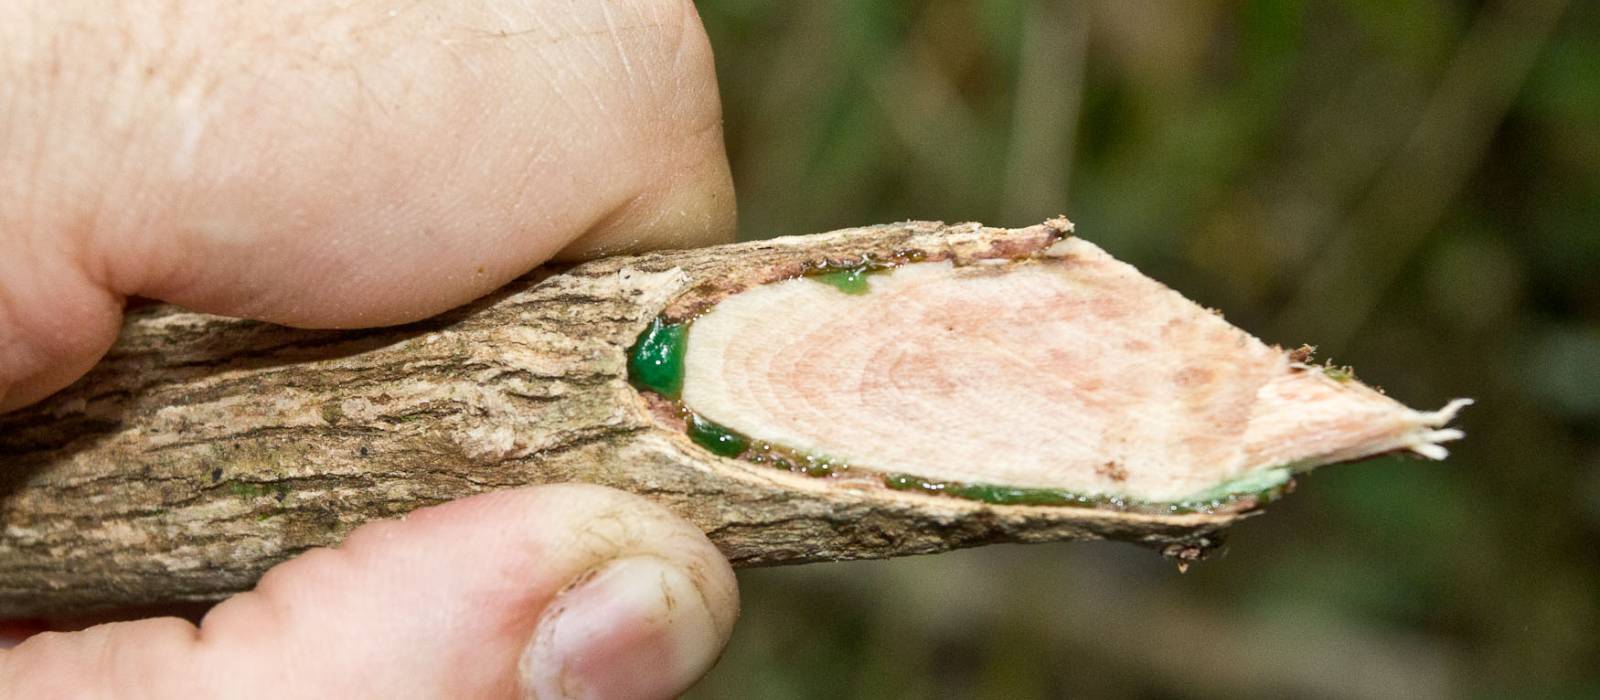 Figure 1. Extremely nickel-rich sap exuding from a cut branch of the tree Phyllanthus balgooyi. This sap contains about 16 per cent nickel.